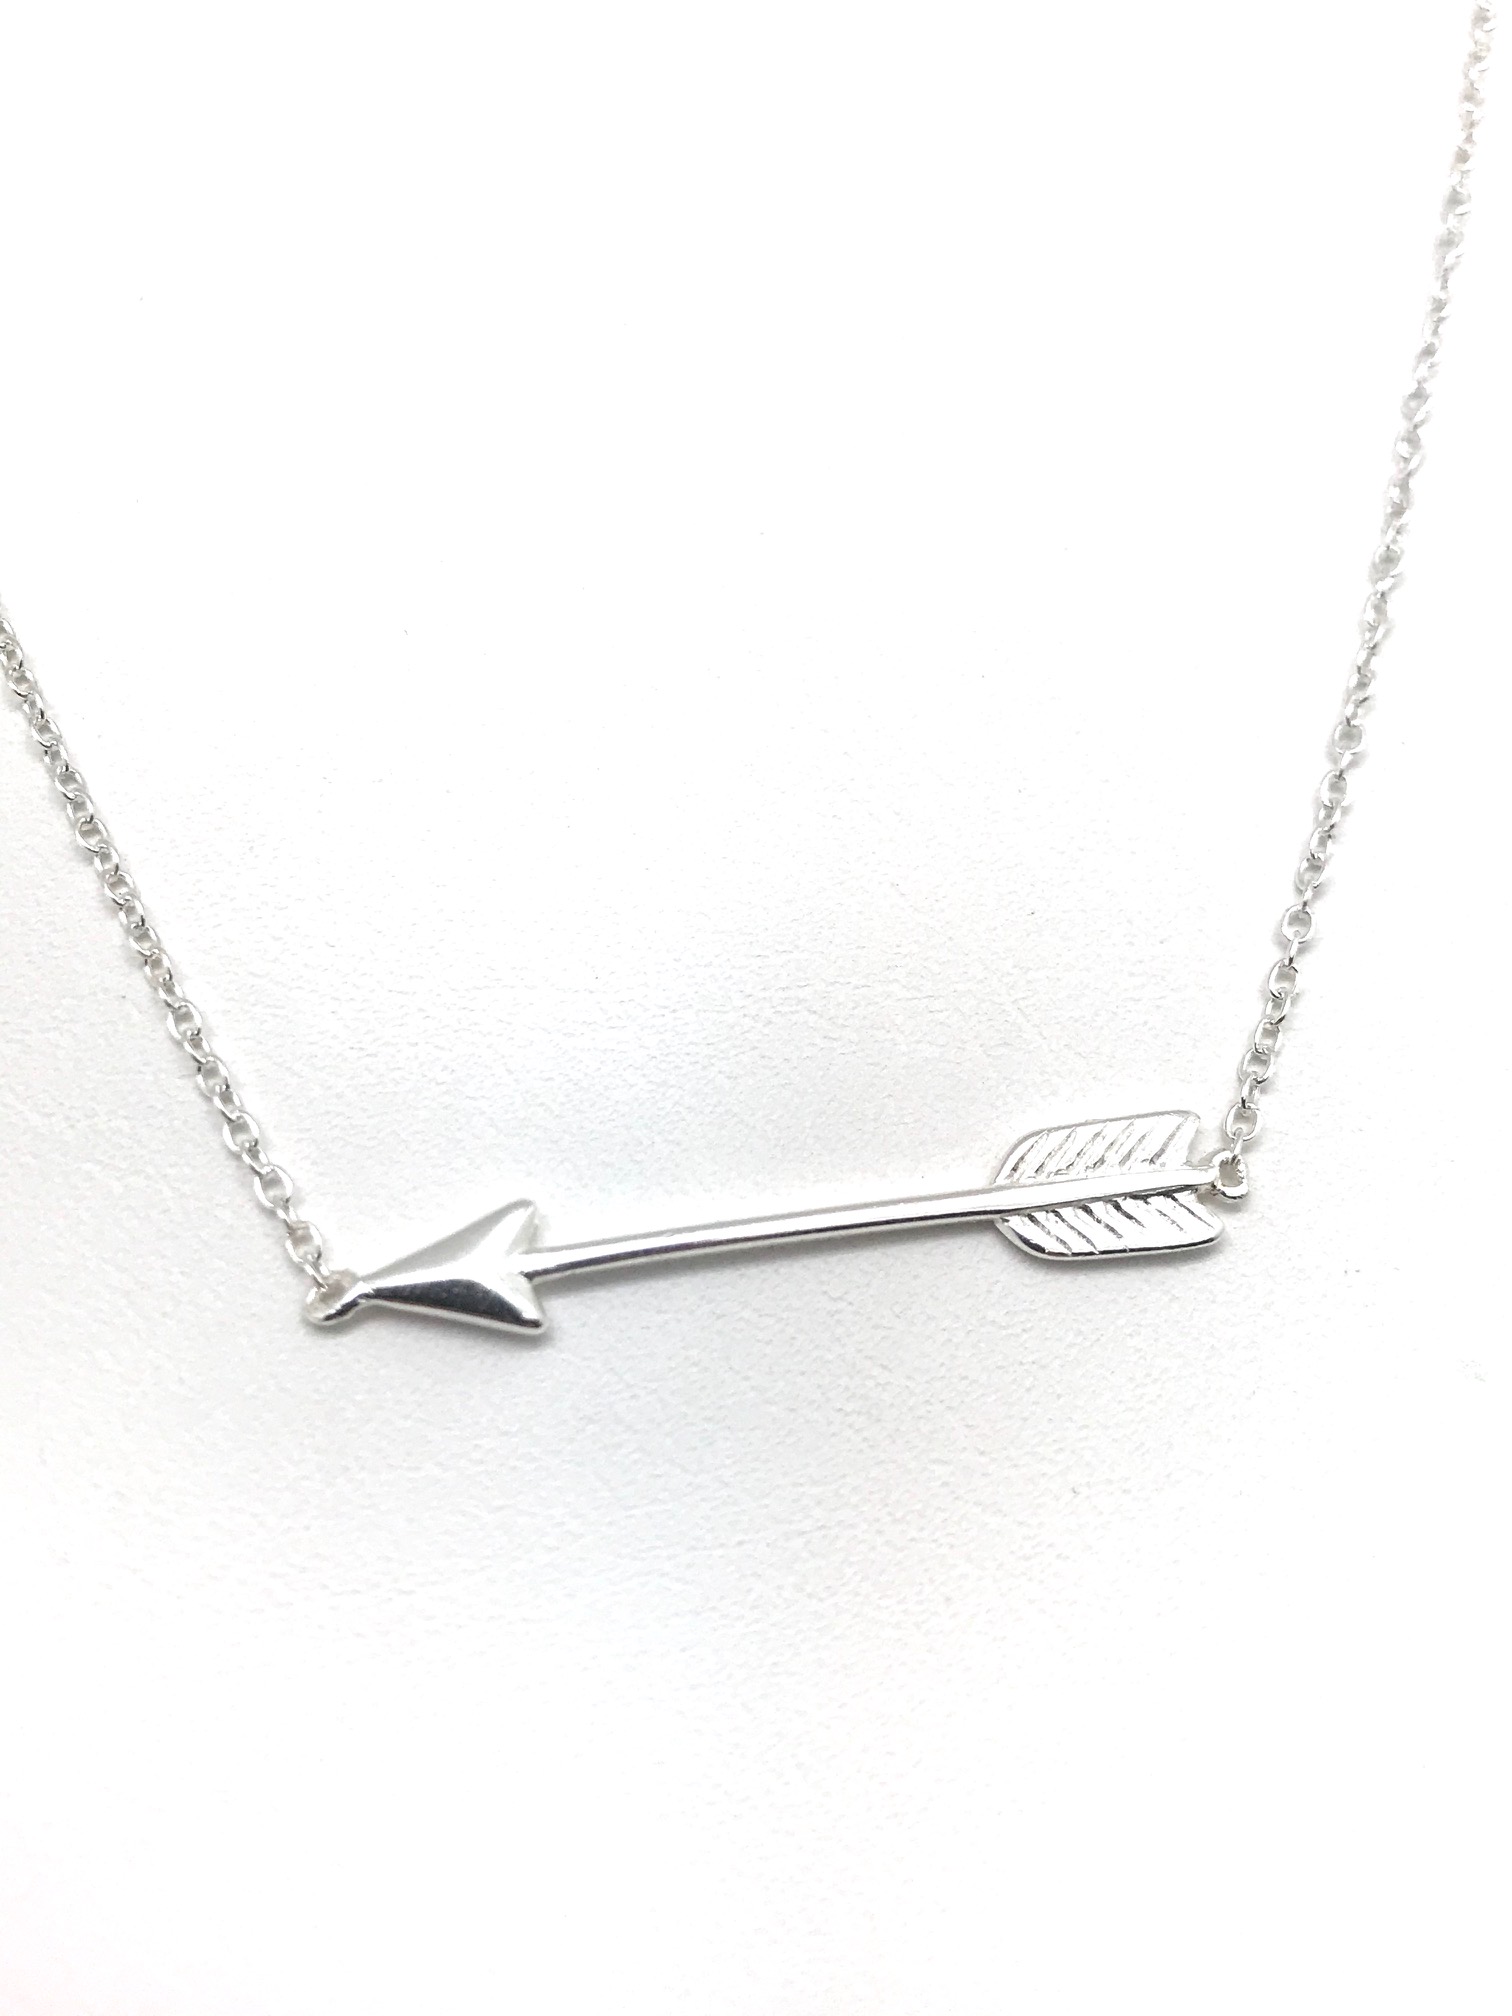 Small arrow necklace Arrow Silver chain necklace women Arrow necklace for woman in Sterling silver